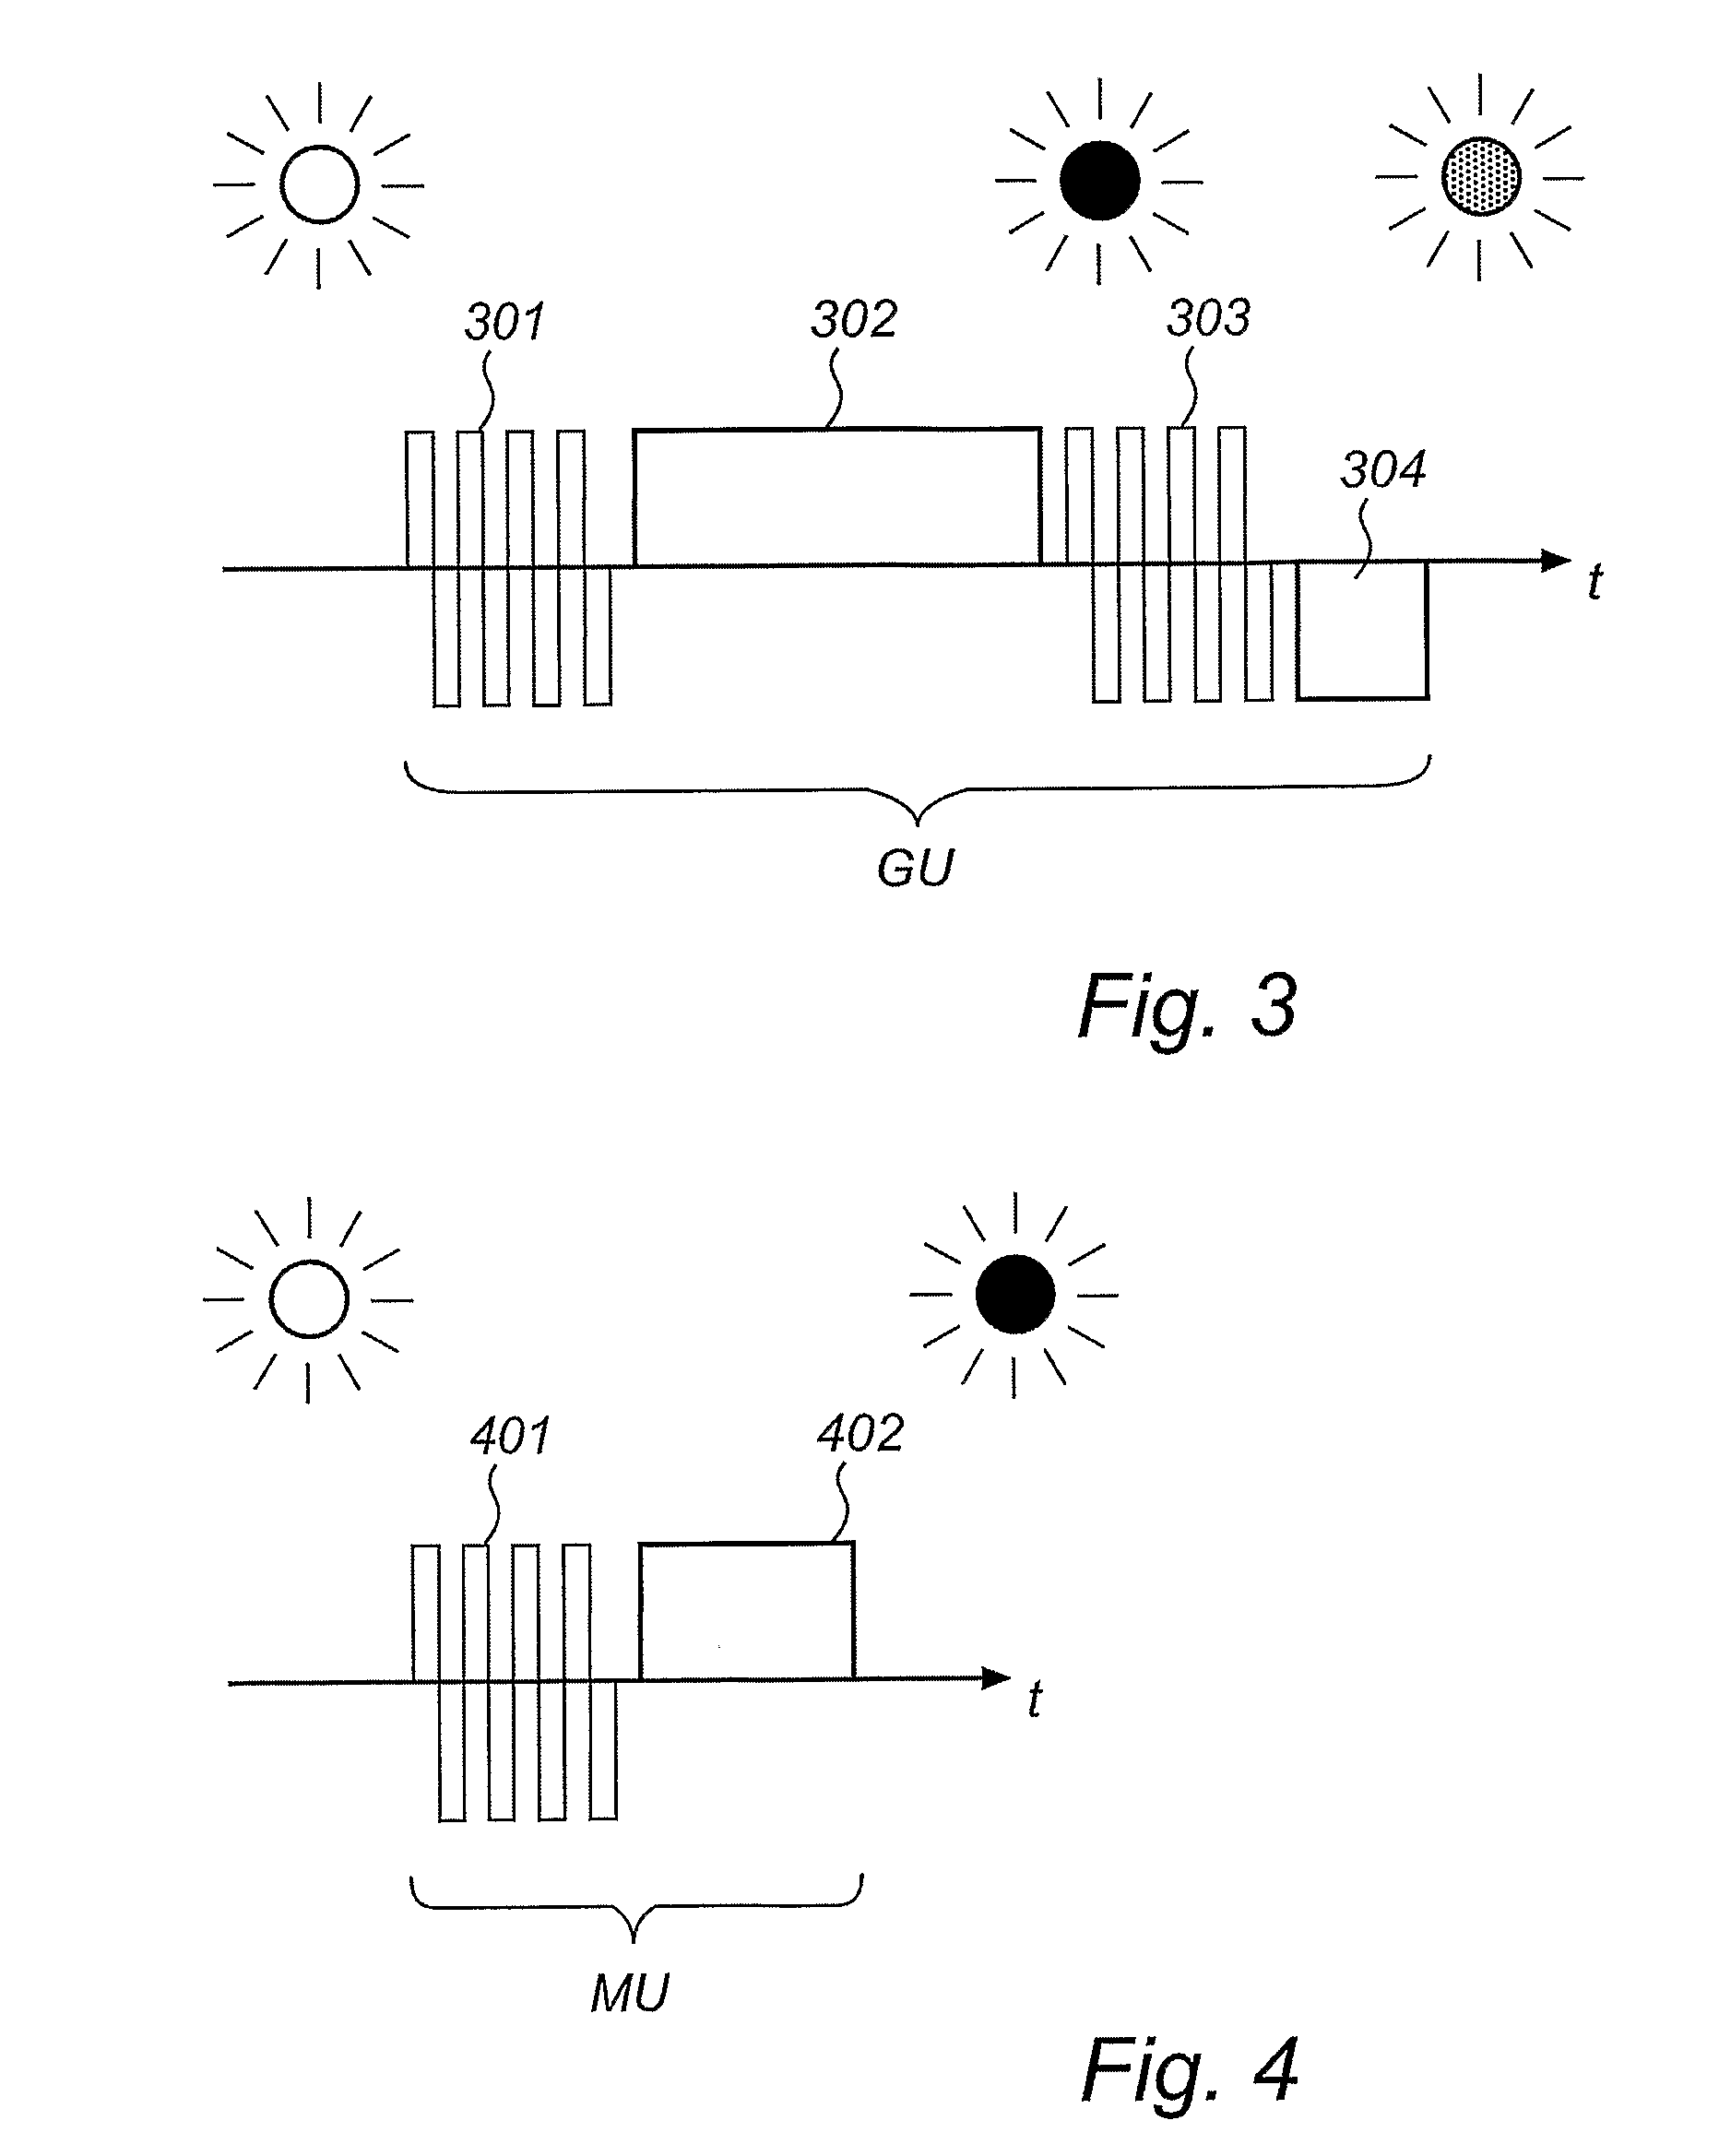 Transition between grayscale an dmonochrome addressing of an electrophoretic display